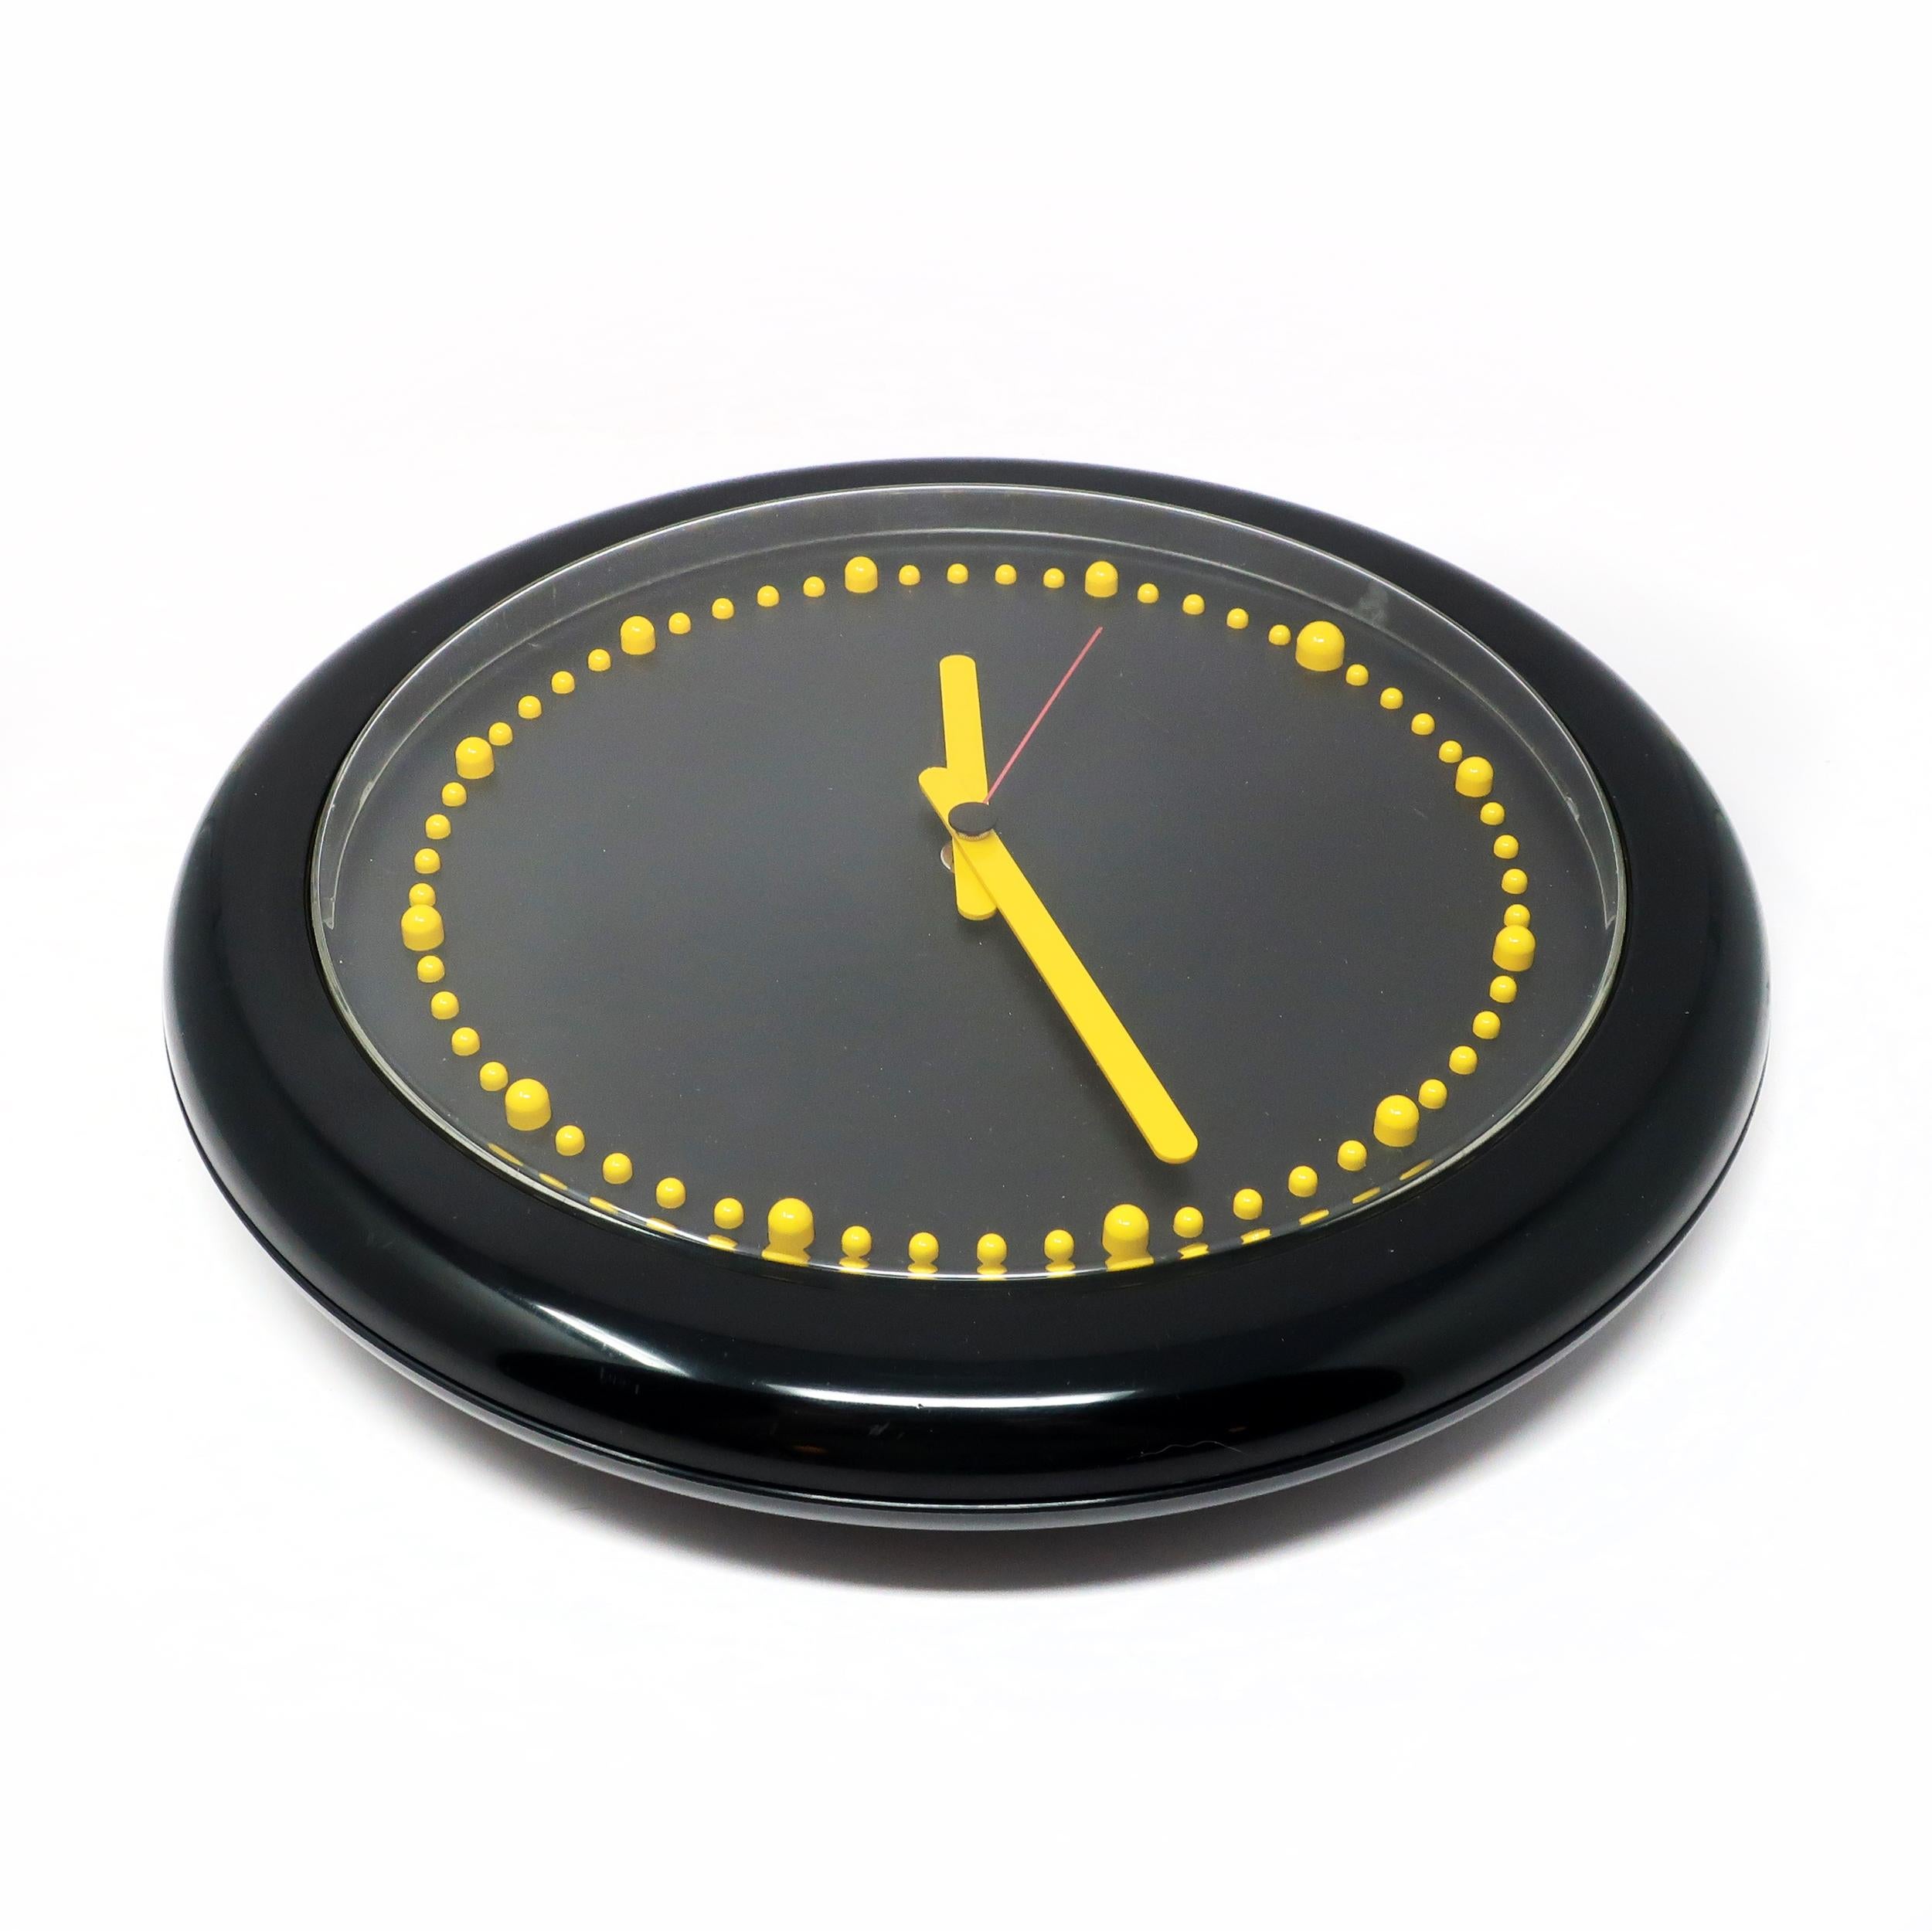 Post-Modern 1980s Postmodern Black and Yellow Rexite Zero 980 Wall Clock For Sale